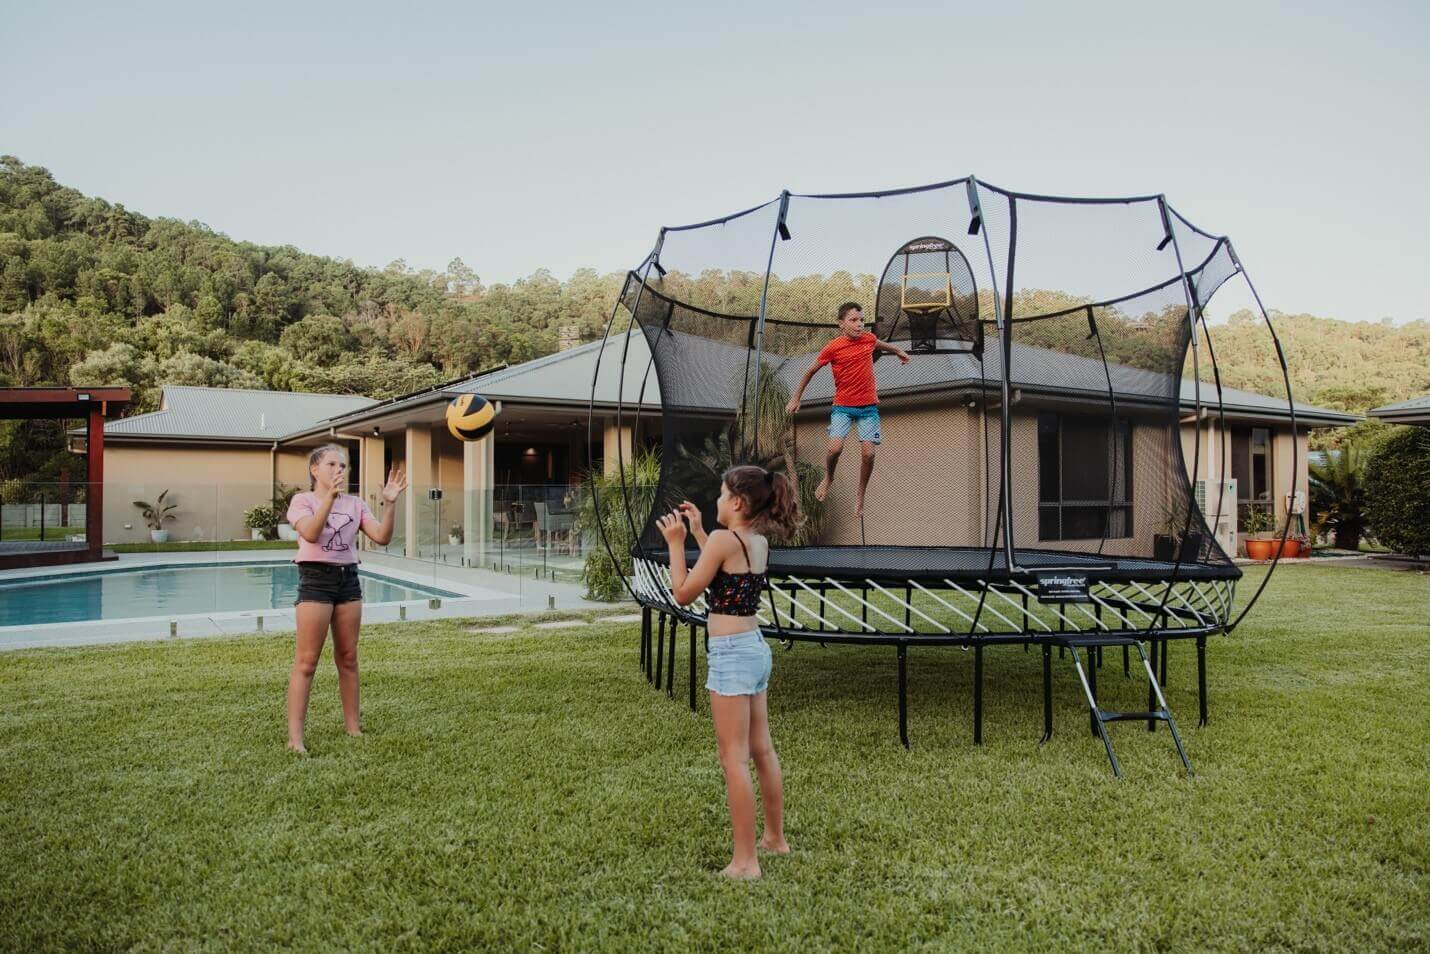 A boy jumping on a Springfree Trampoline while two other kids play ball in the backyard.